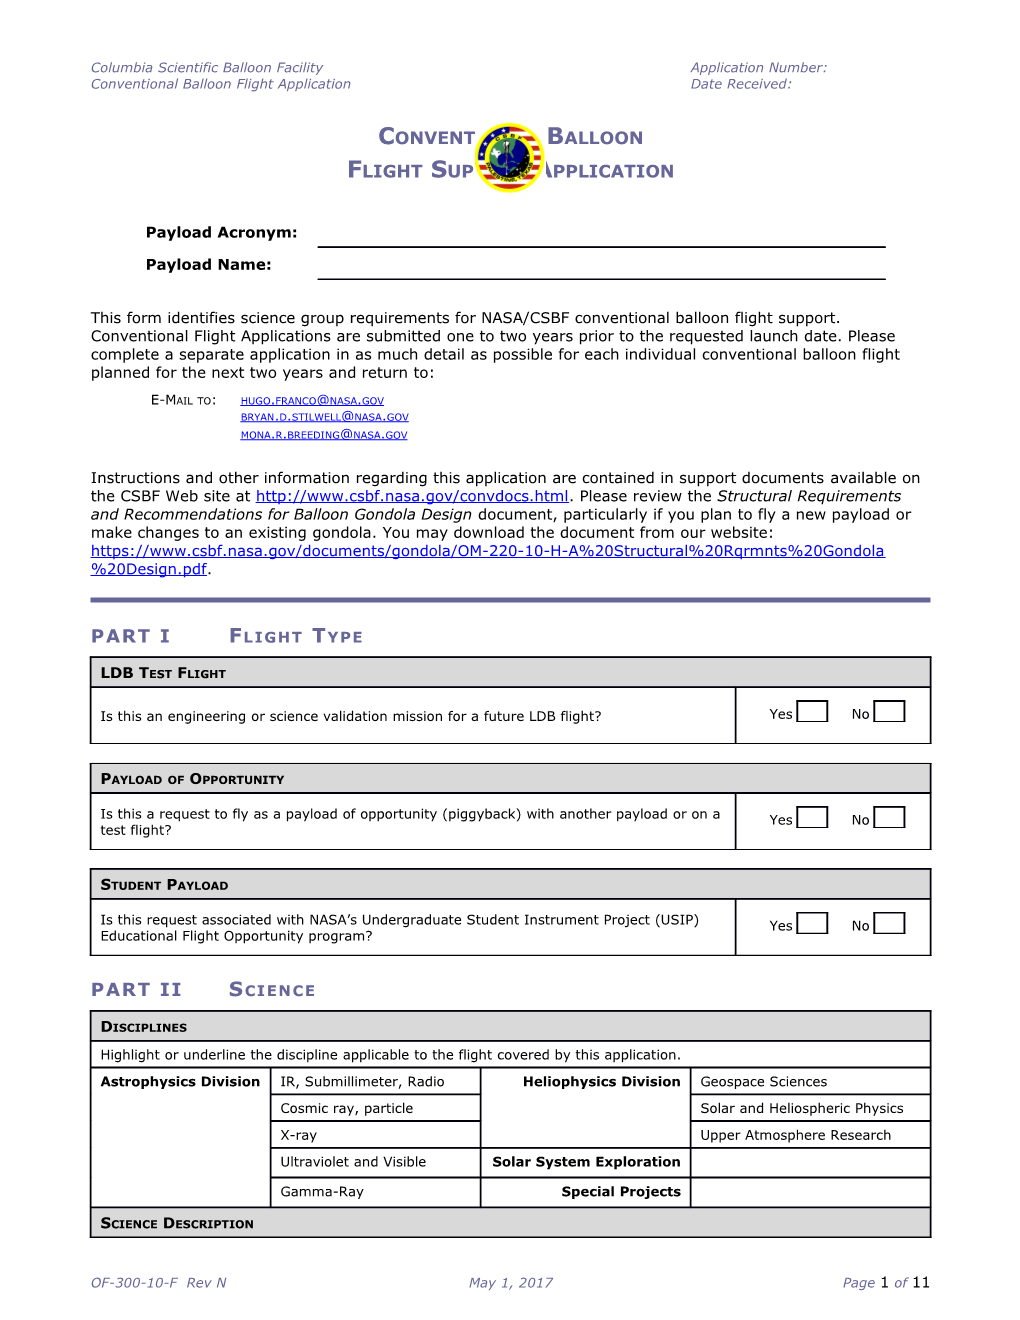 Columbia Scientific Balloon Facility Application Number